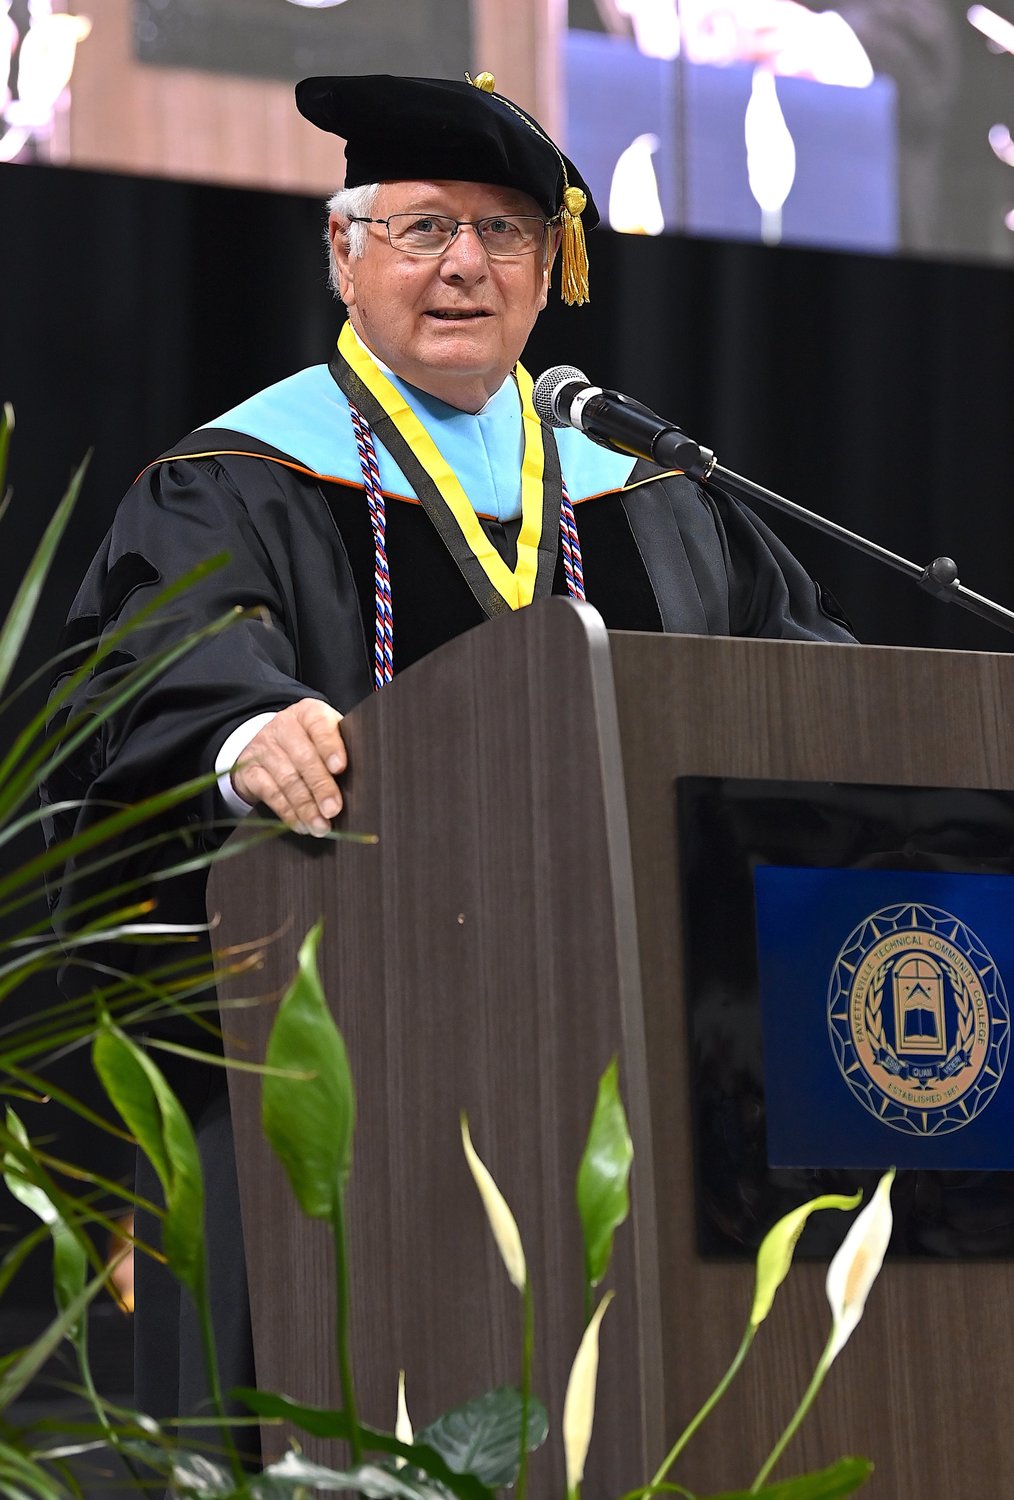 FTCC President Larry Keen, presiding over his final commencement before retiring at the end of the year, praised the graduates on their dedication and encouraged them to continue learning during commencement exercises May 13.